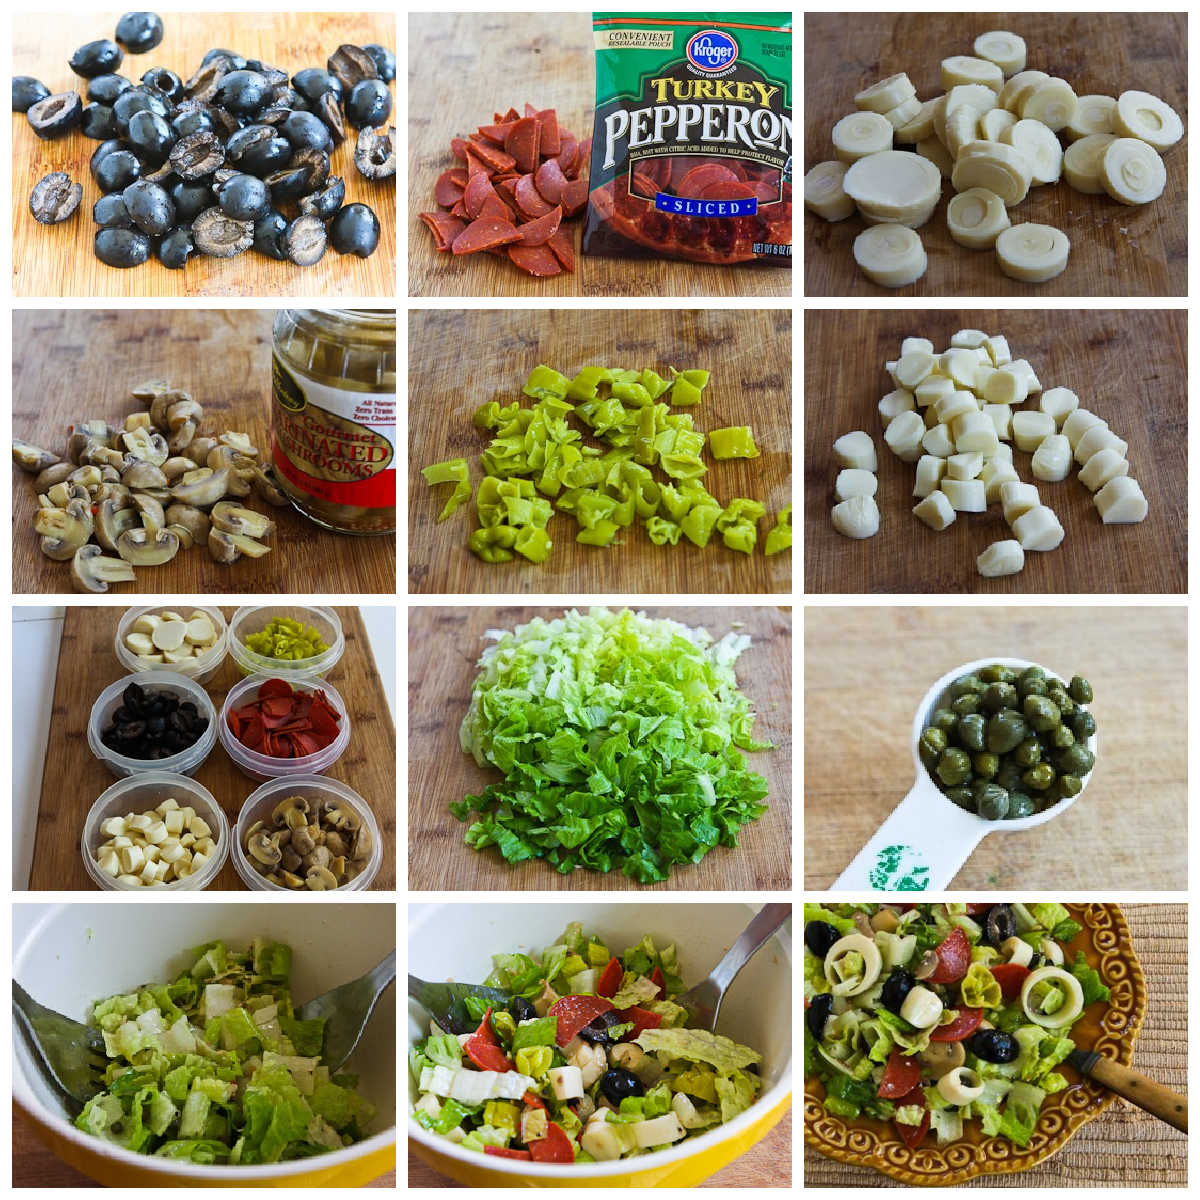 Collage showing steps for prepping and assembling antipasto chopped salad.